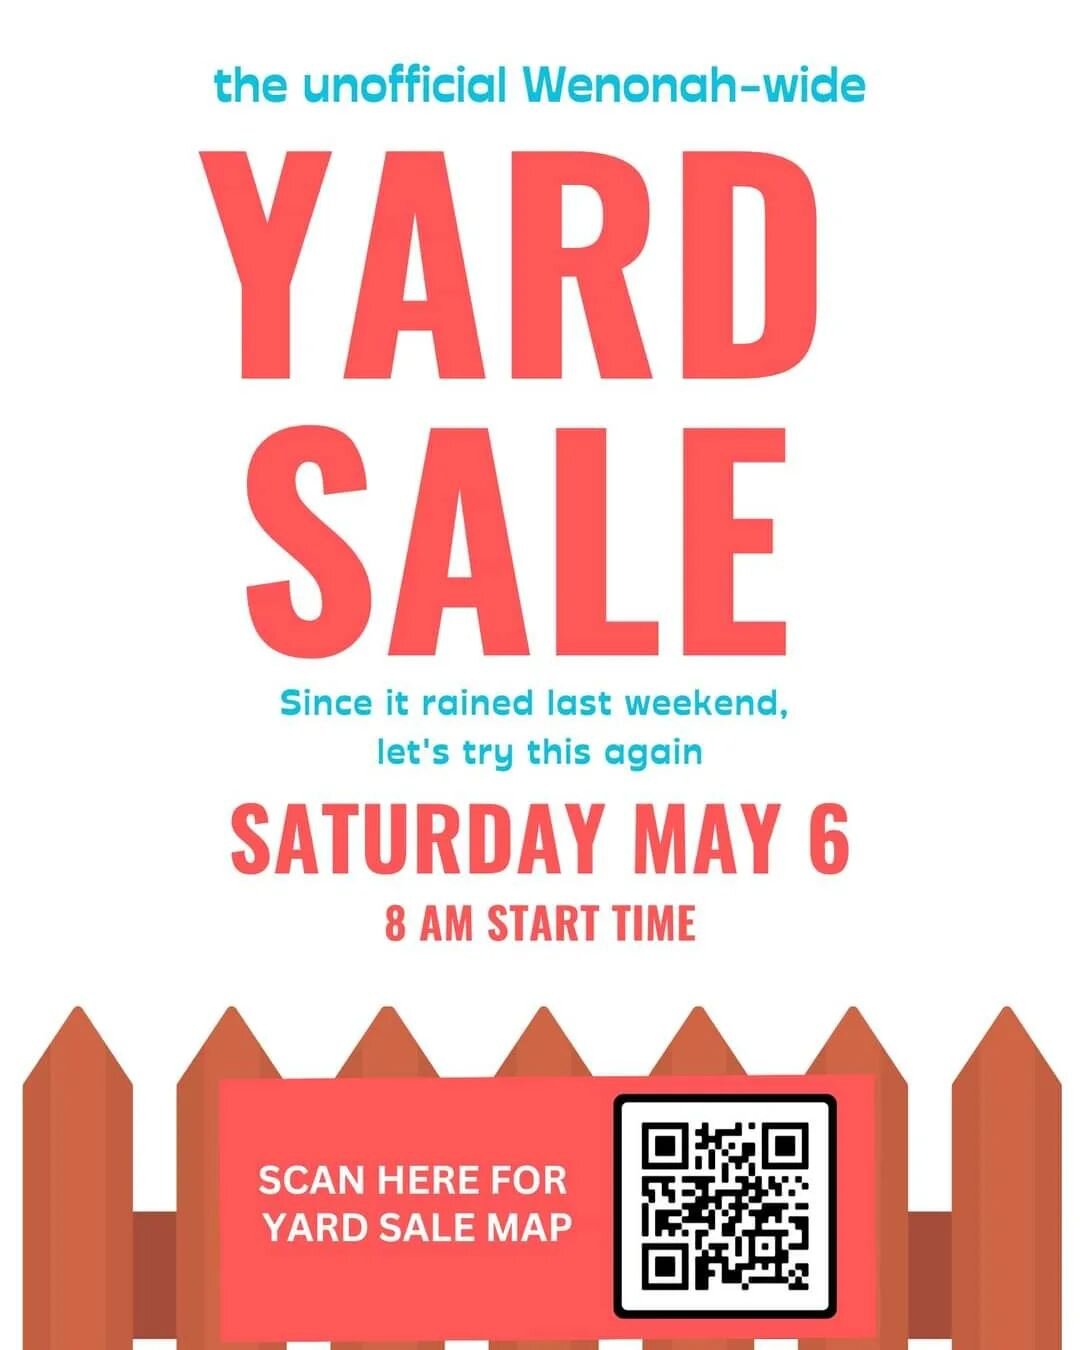 We'll be participating in the rescheduled Wenonah-wide yard sale tomorrow! Stop by and grab some good deals, in support of the ministries of our ECW (Episcopal Church Women).

#SouthJersey #YardSale #wenonah #GloucesterCounty #nj